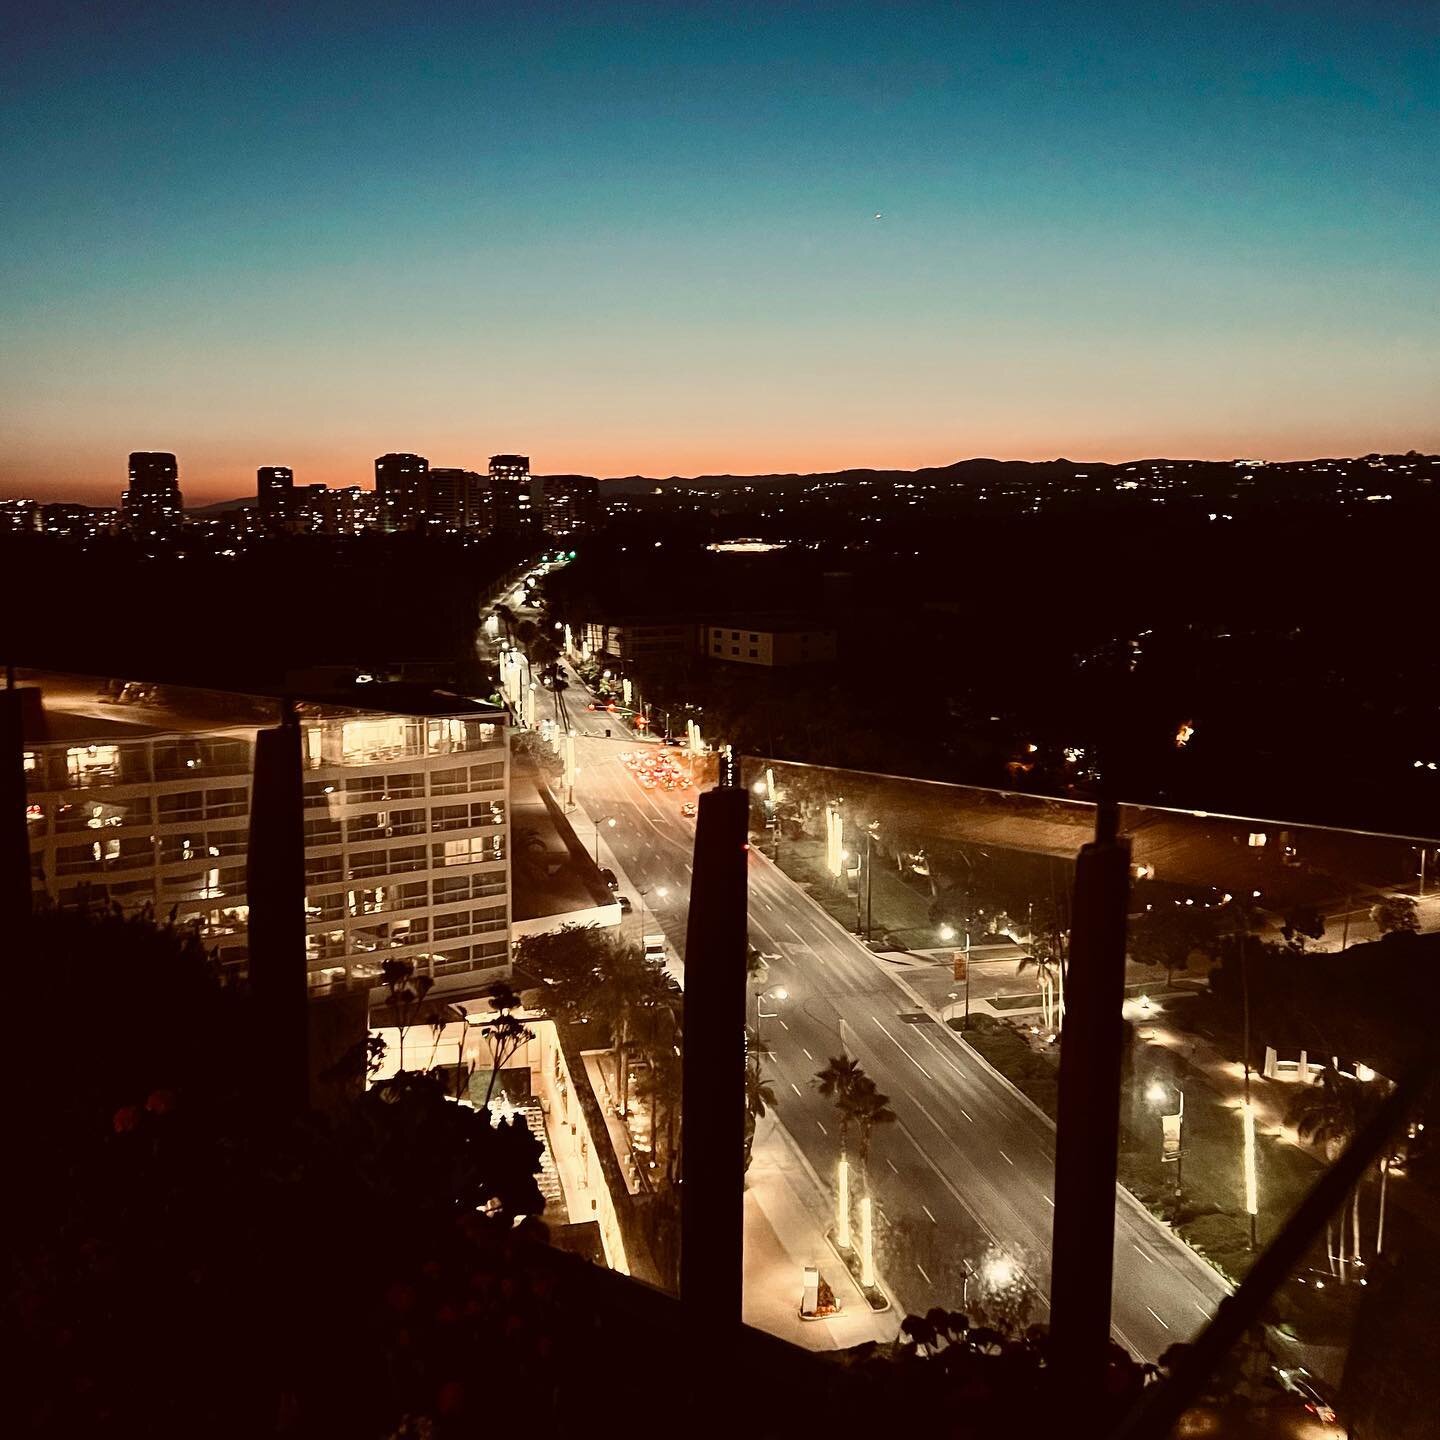 Atop of Waldorf in Bev Hills at sunset&hellip;..another world&hellip;
#sunset #sunsets #perspective #beverlyhills #waldorf #amwriting #writersofinstagram #writingcommunity #sky #skyscape